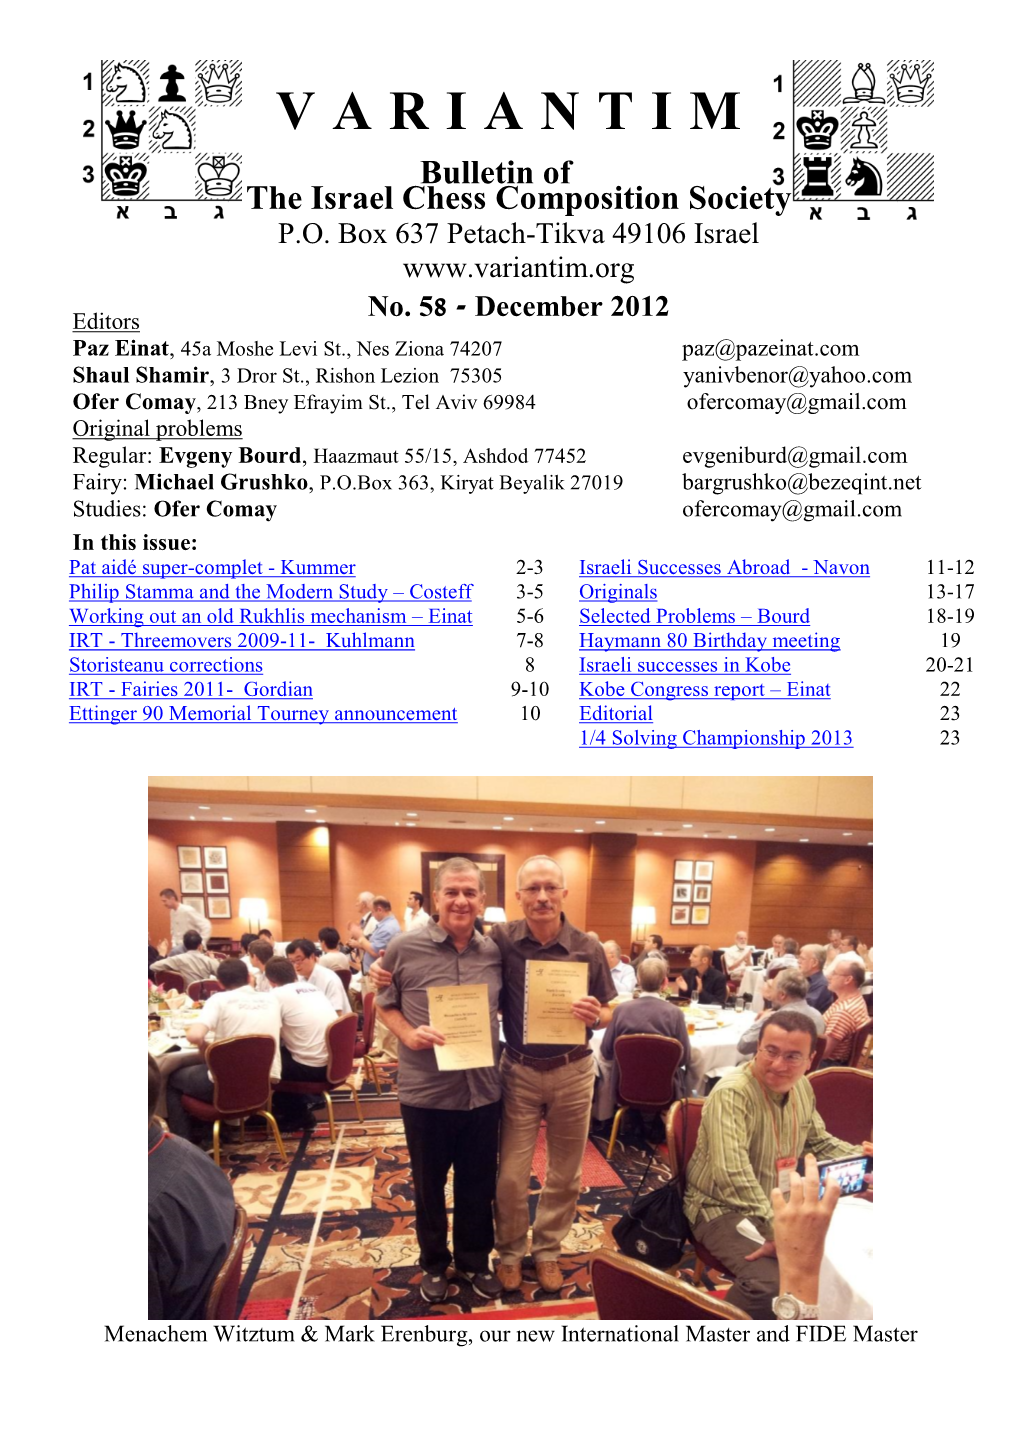 VARIANTIM Bulletin of the Israel Chess Composition Society